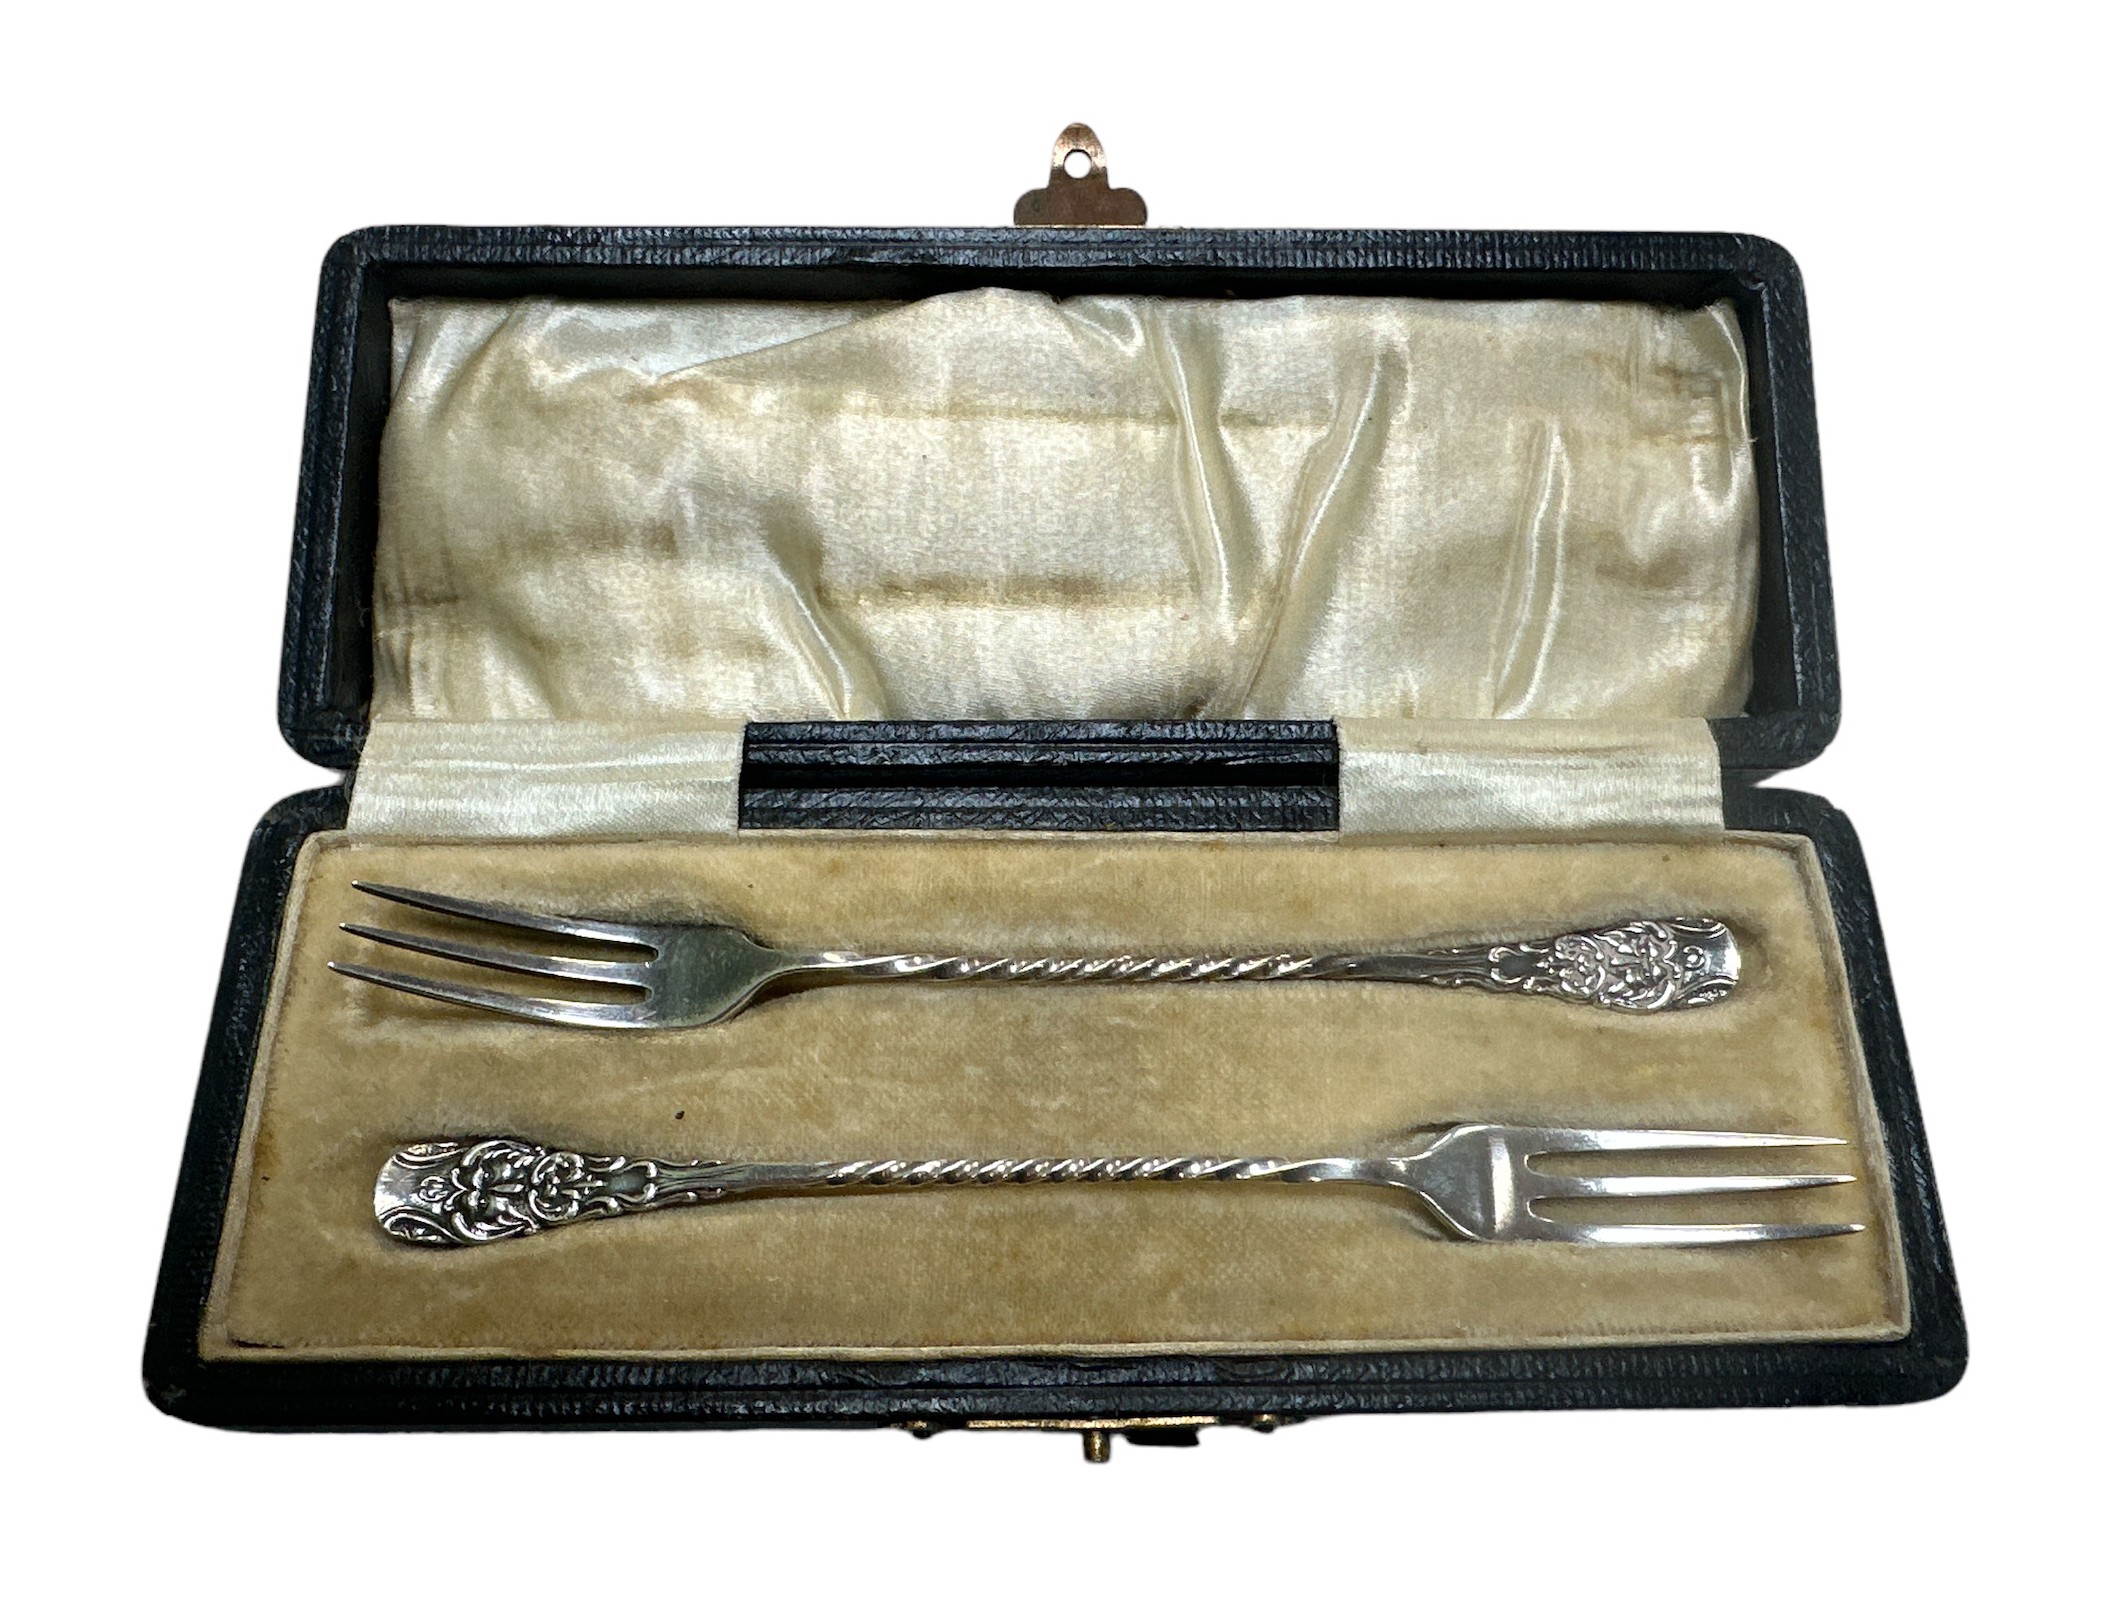 Levi & Salaman cased pair of silver pickle forks, Birmingham 1911, combined weight approx. 14.8g